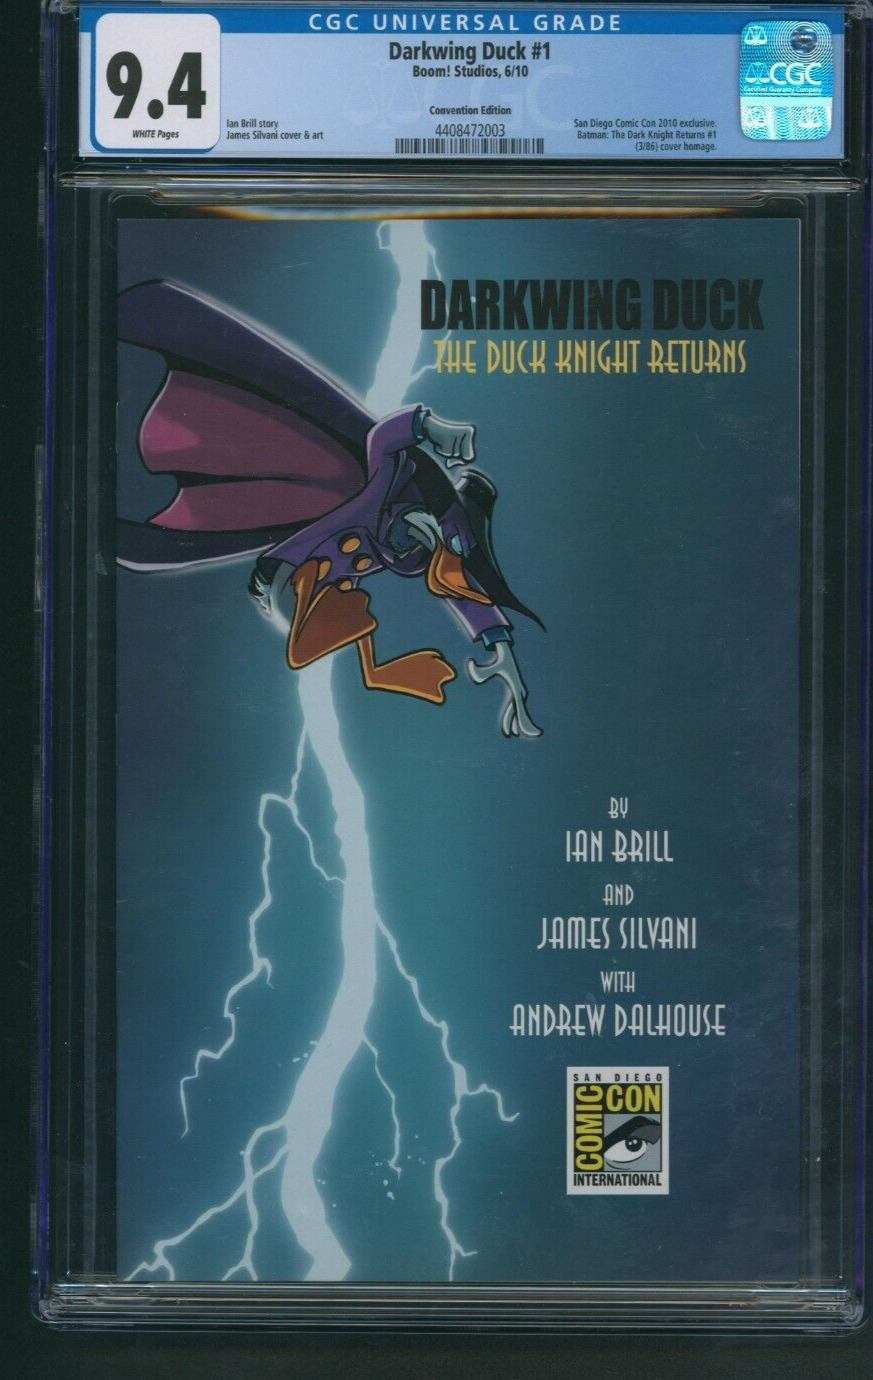 Darkwing Duck #1 SDCC Convention Edition Variant CGC 9.4 BOOM Studios 2010